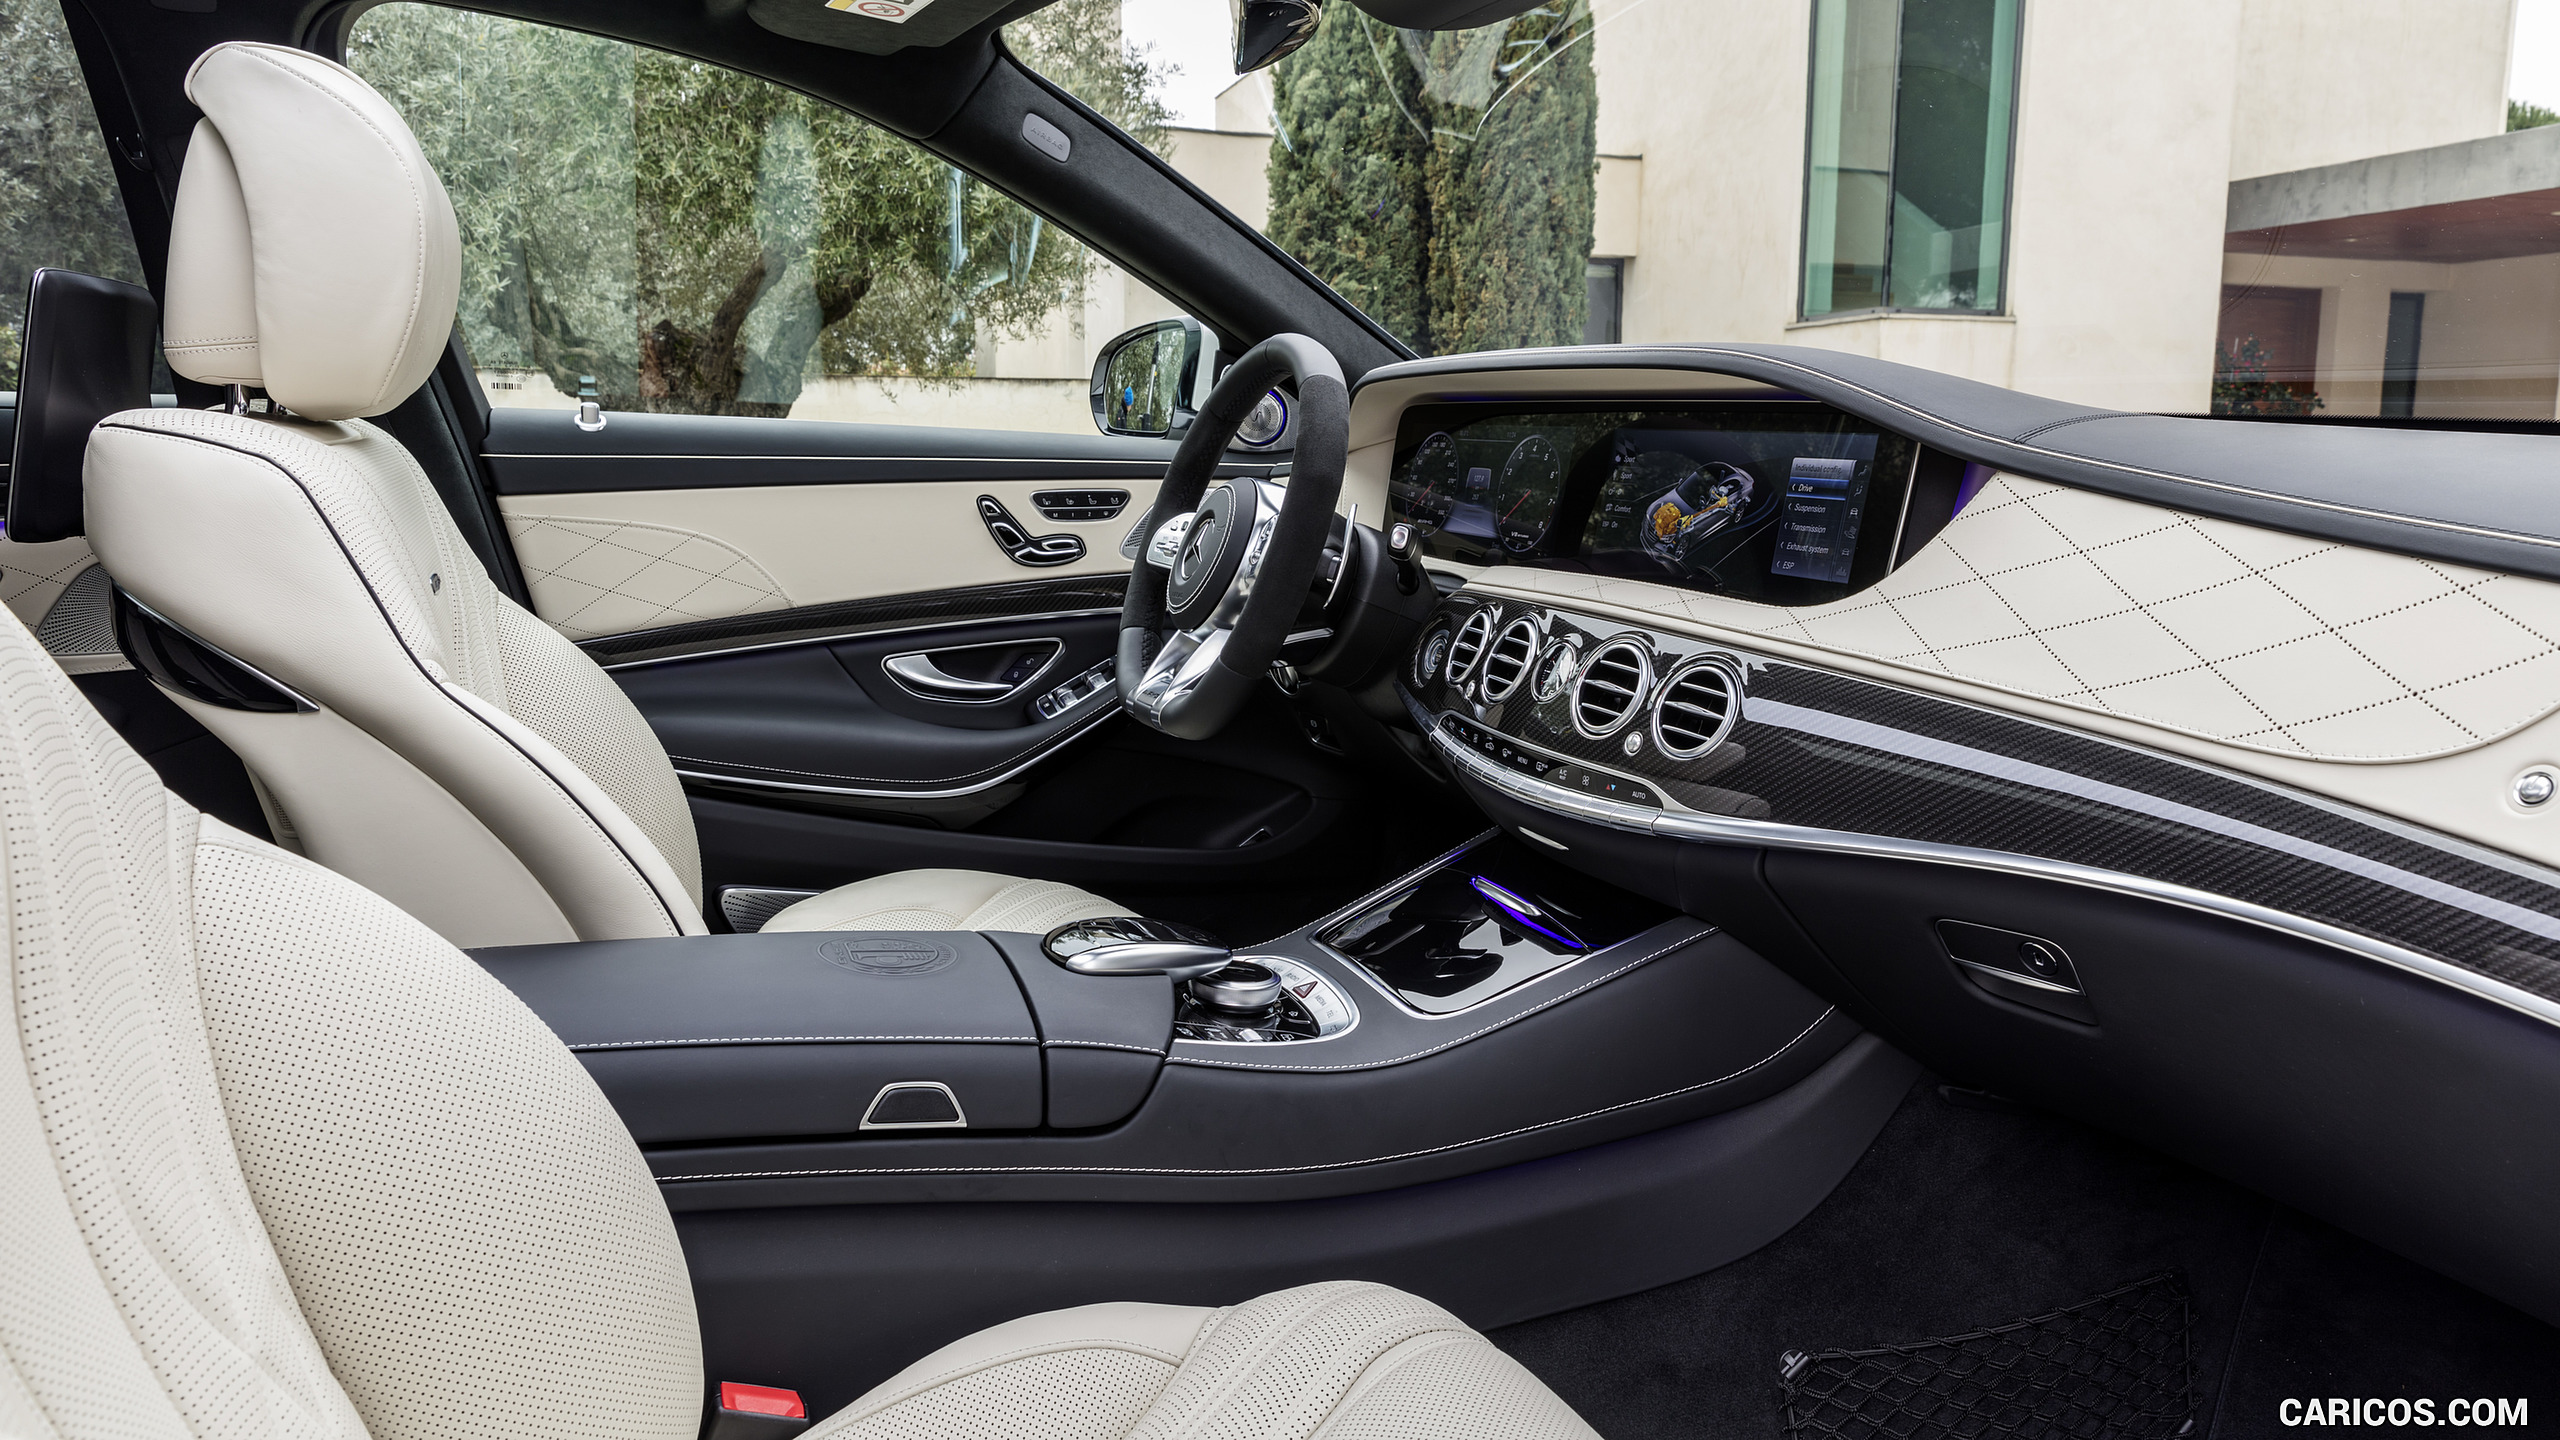 2018 Mercedes-AMG S63 4MATIC+ - Interior, Front Seats, #27 of 100